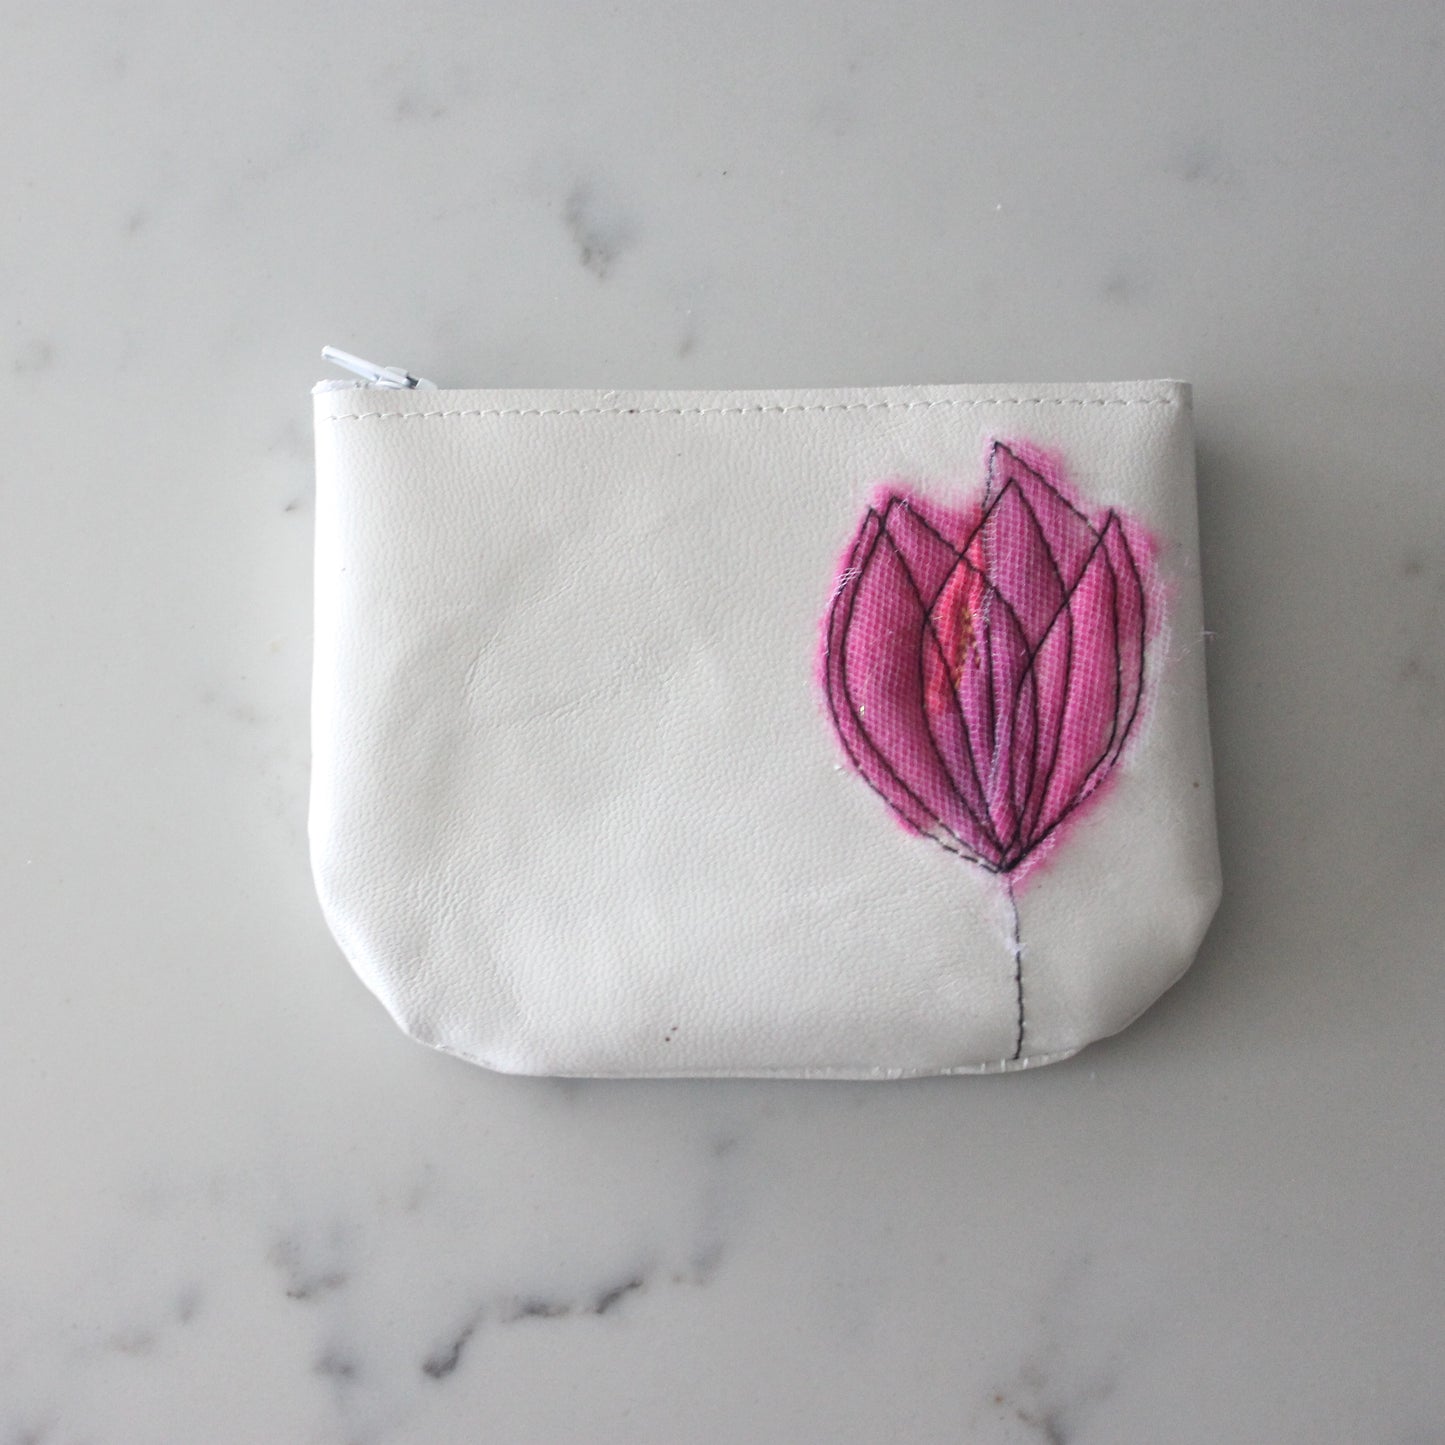 Leather Coin Purse - Pearl White & Hot Pink